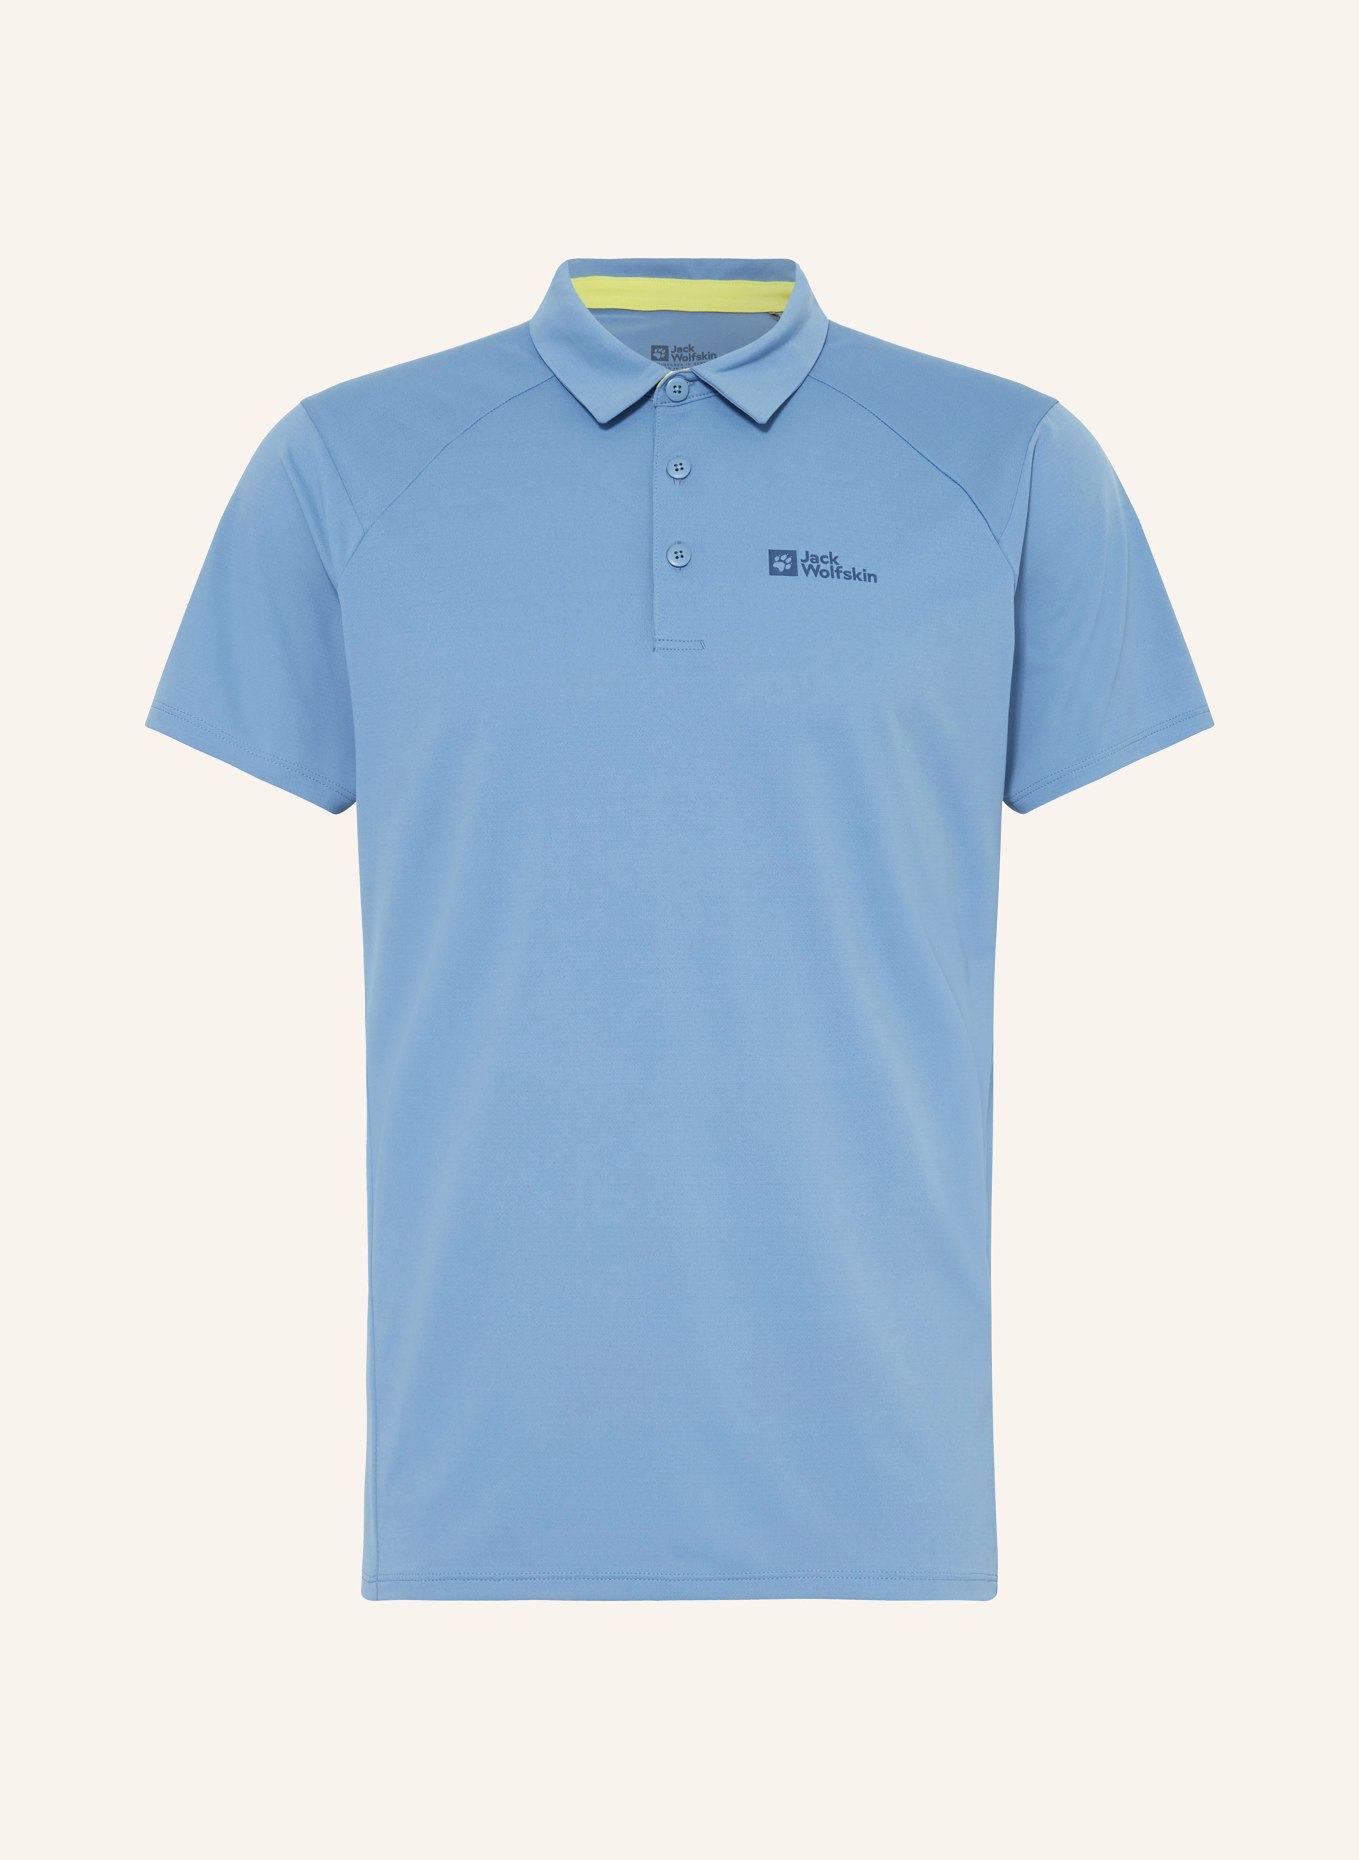 Jack Wolfskin Performance polo shirt PRELIGHT TRAIL, Color: BLUE (Image 1)